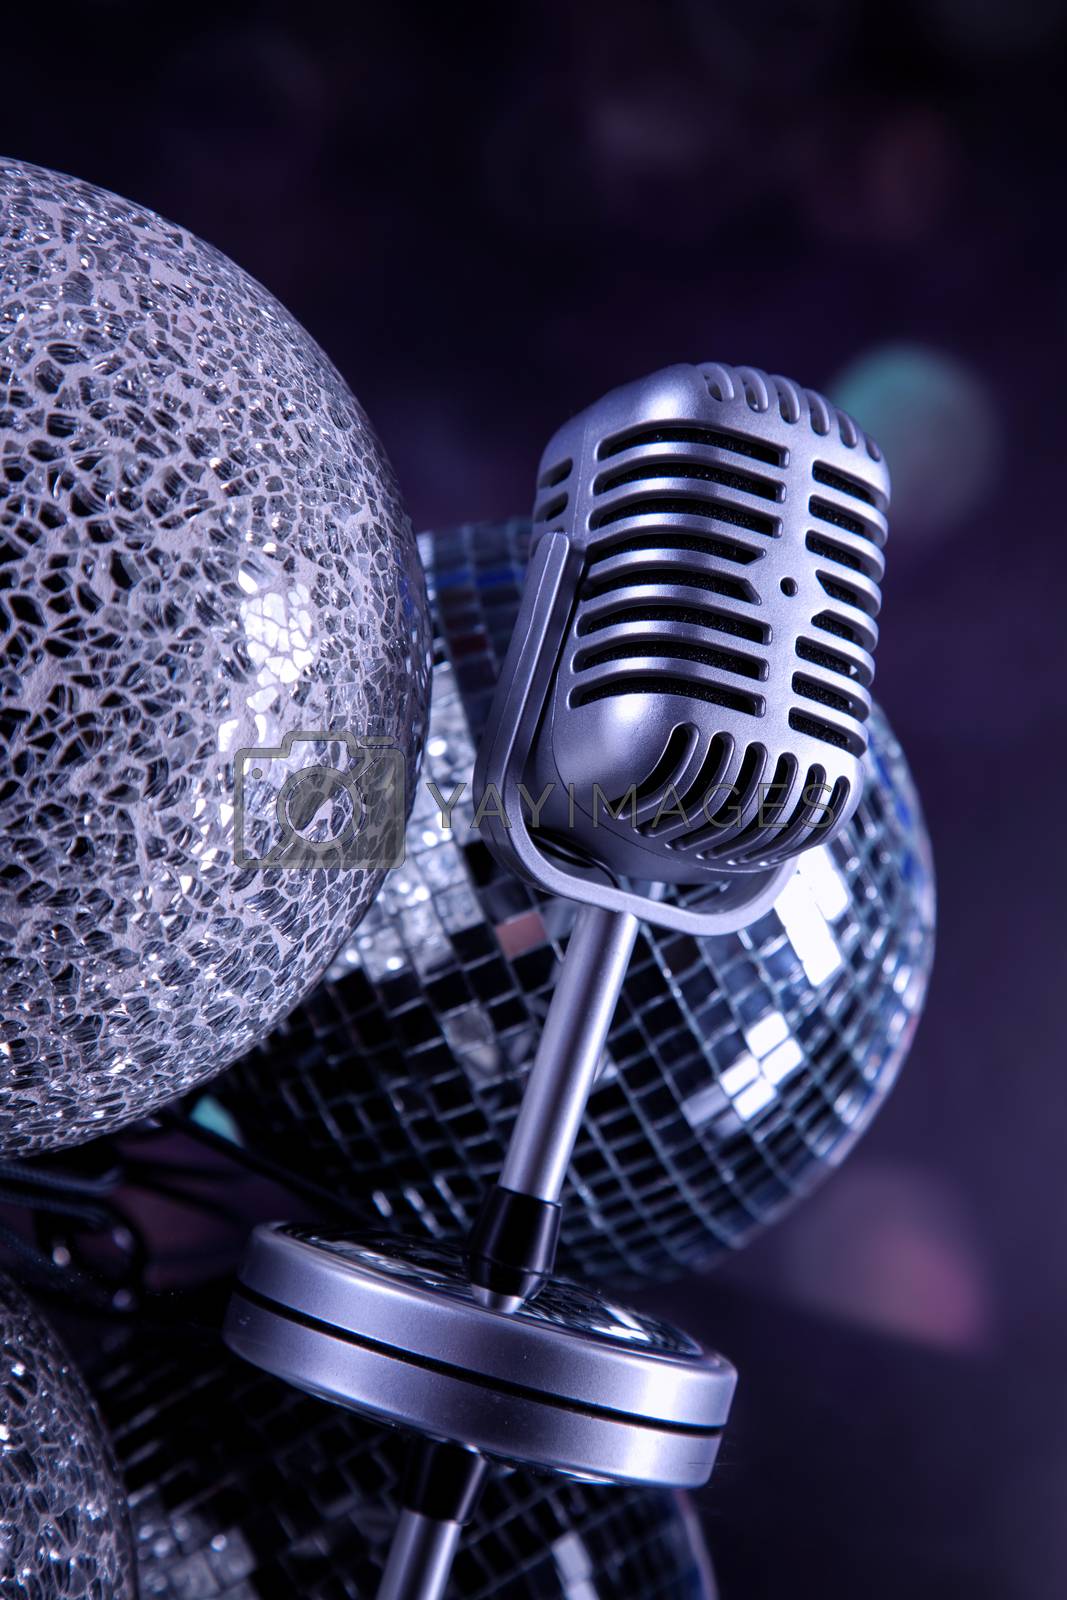 Royalty free image of professional silver microphone by fikmik